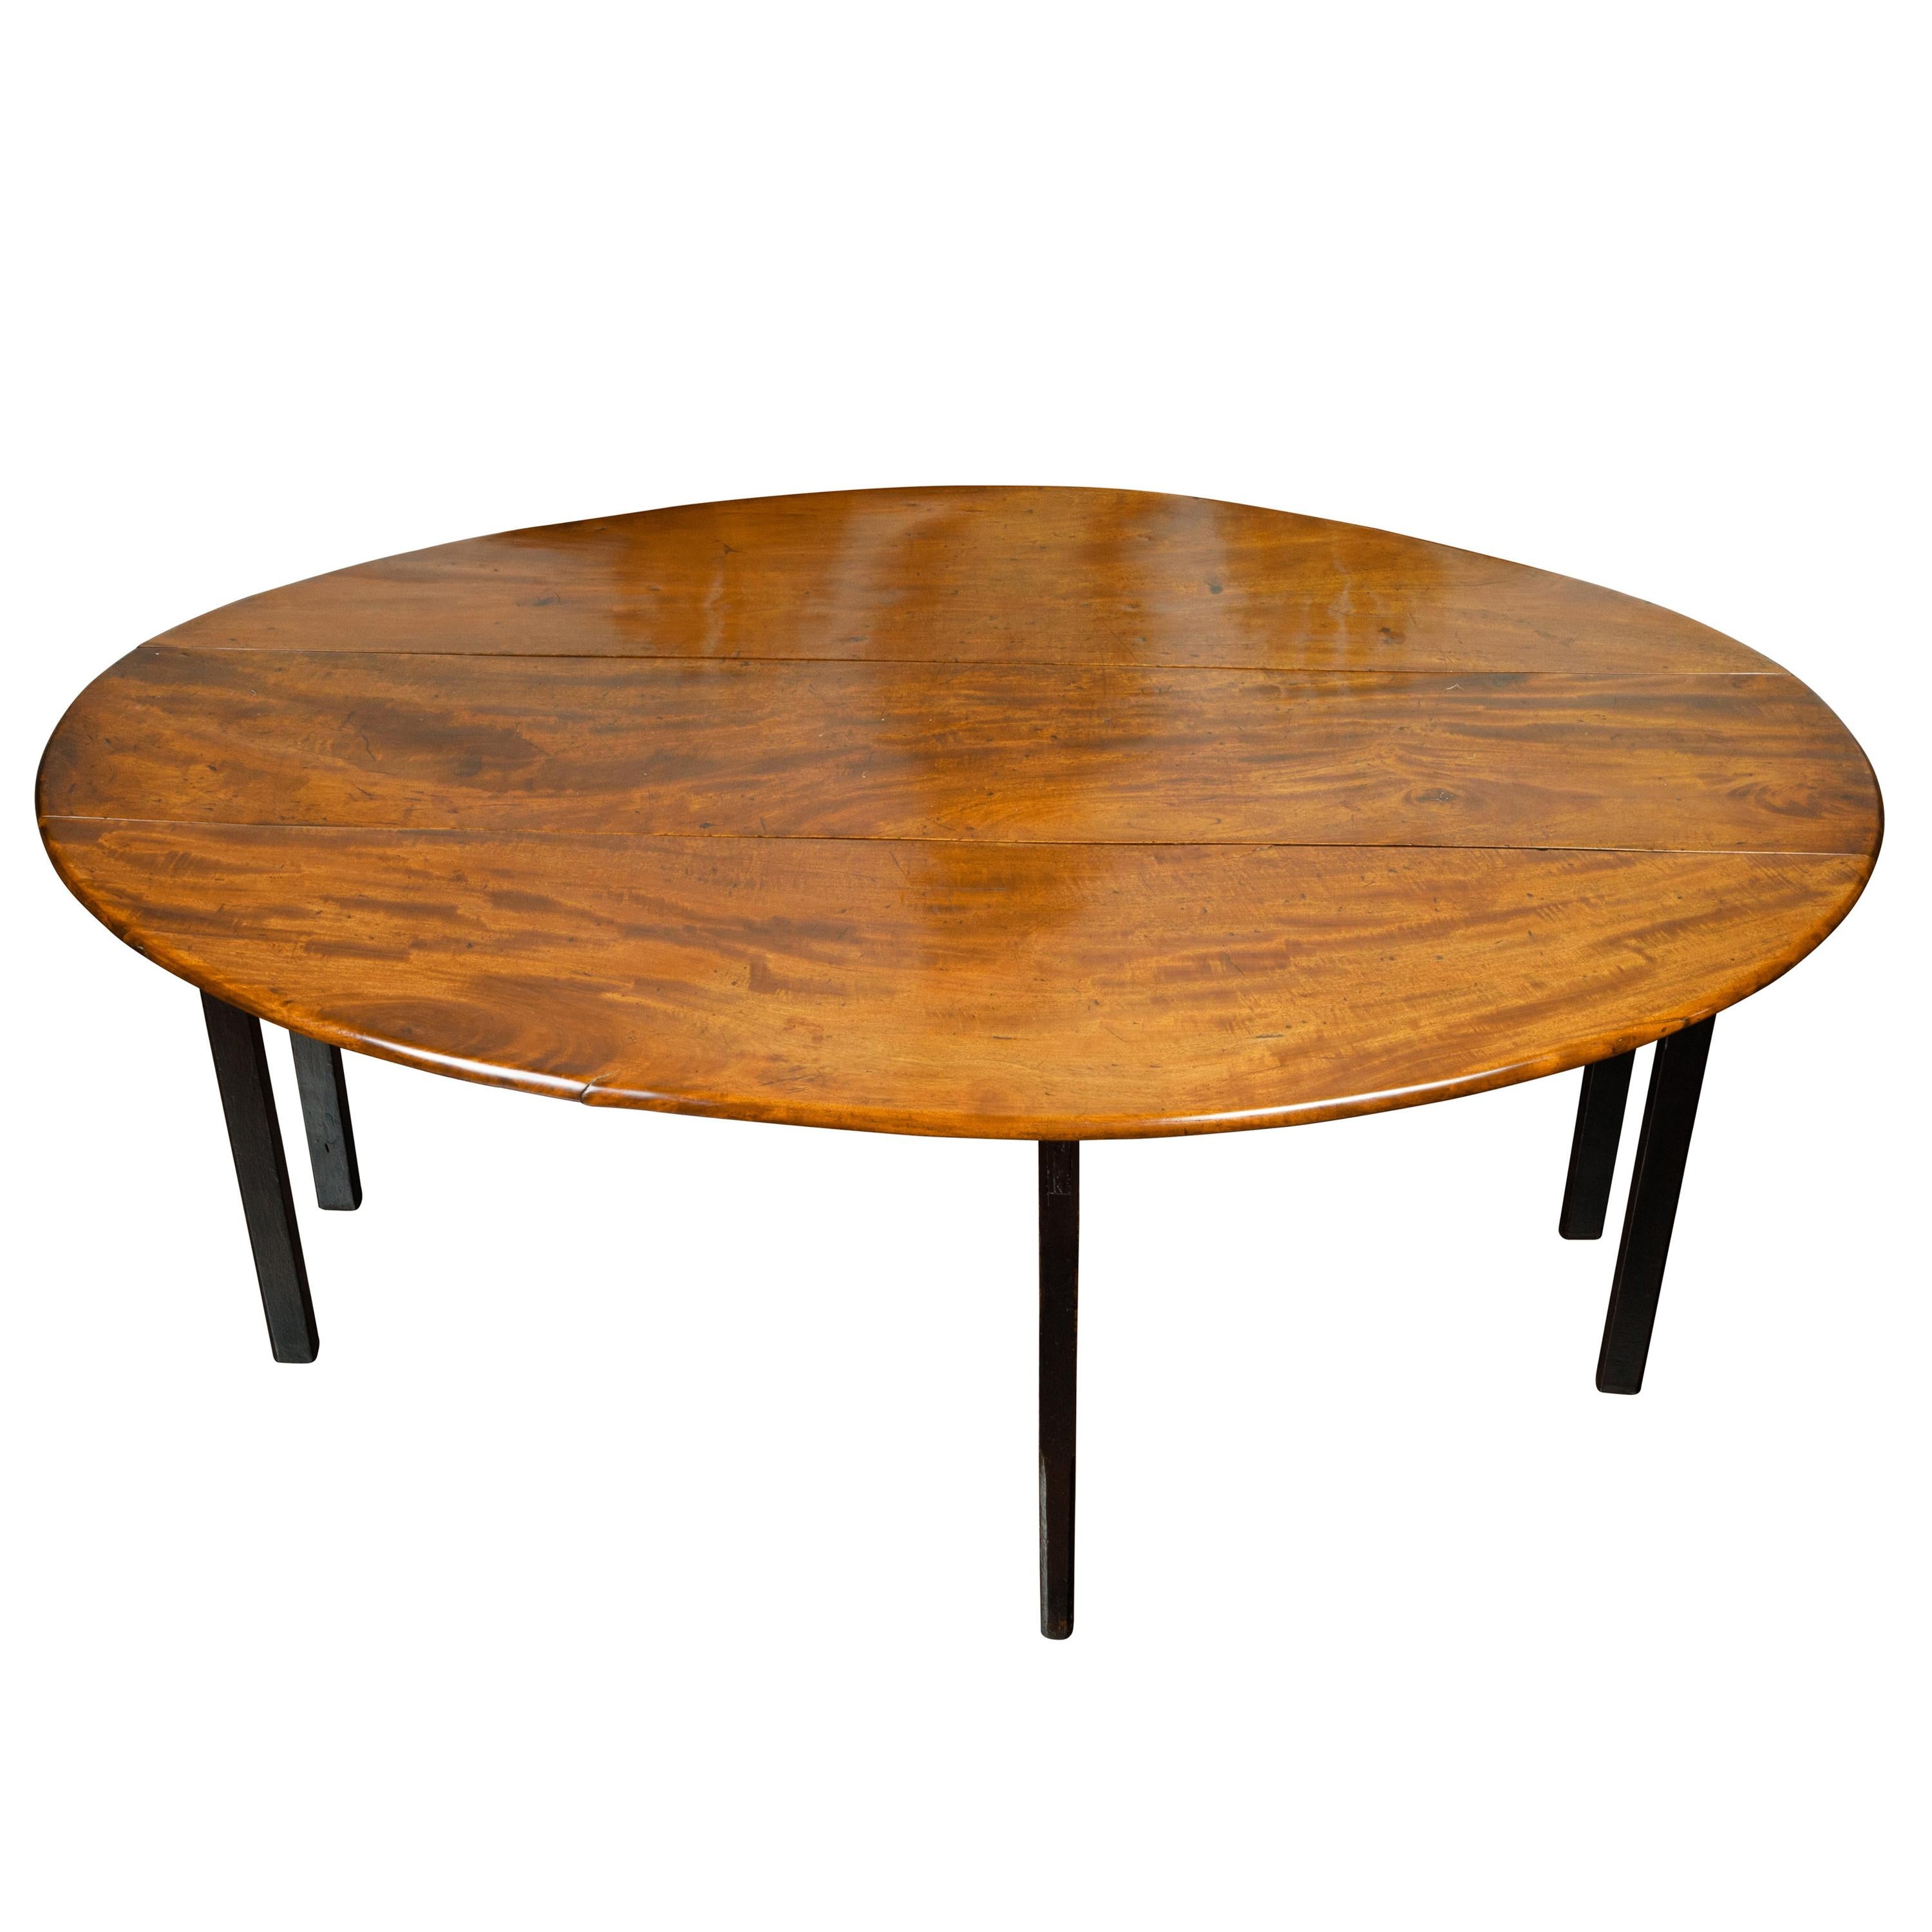 English 1820s Mahogany Drop Leaf Dining Table with Oval Top and Ebonized Legs